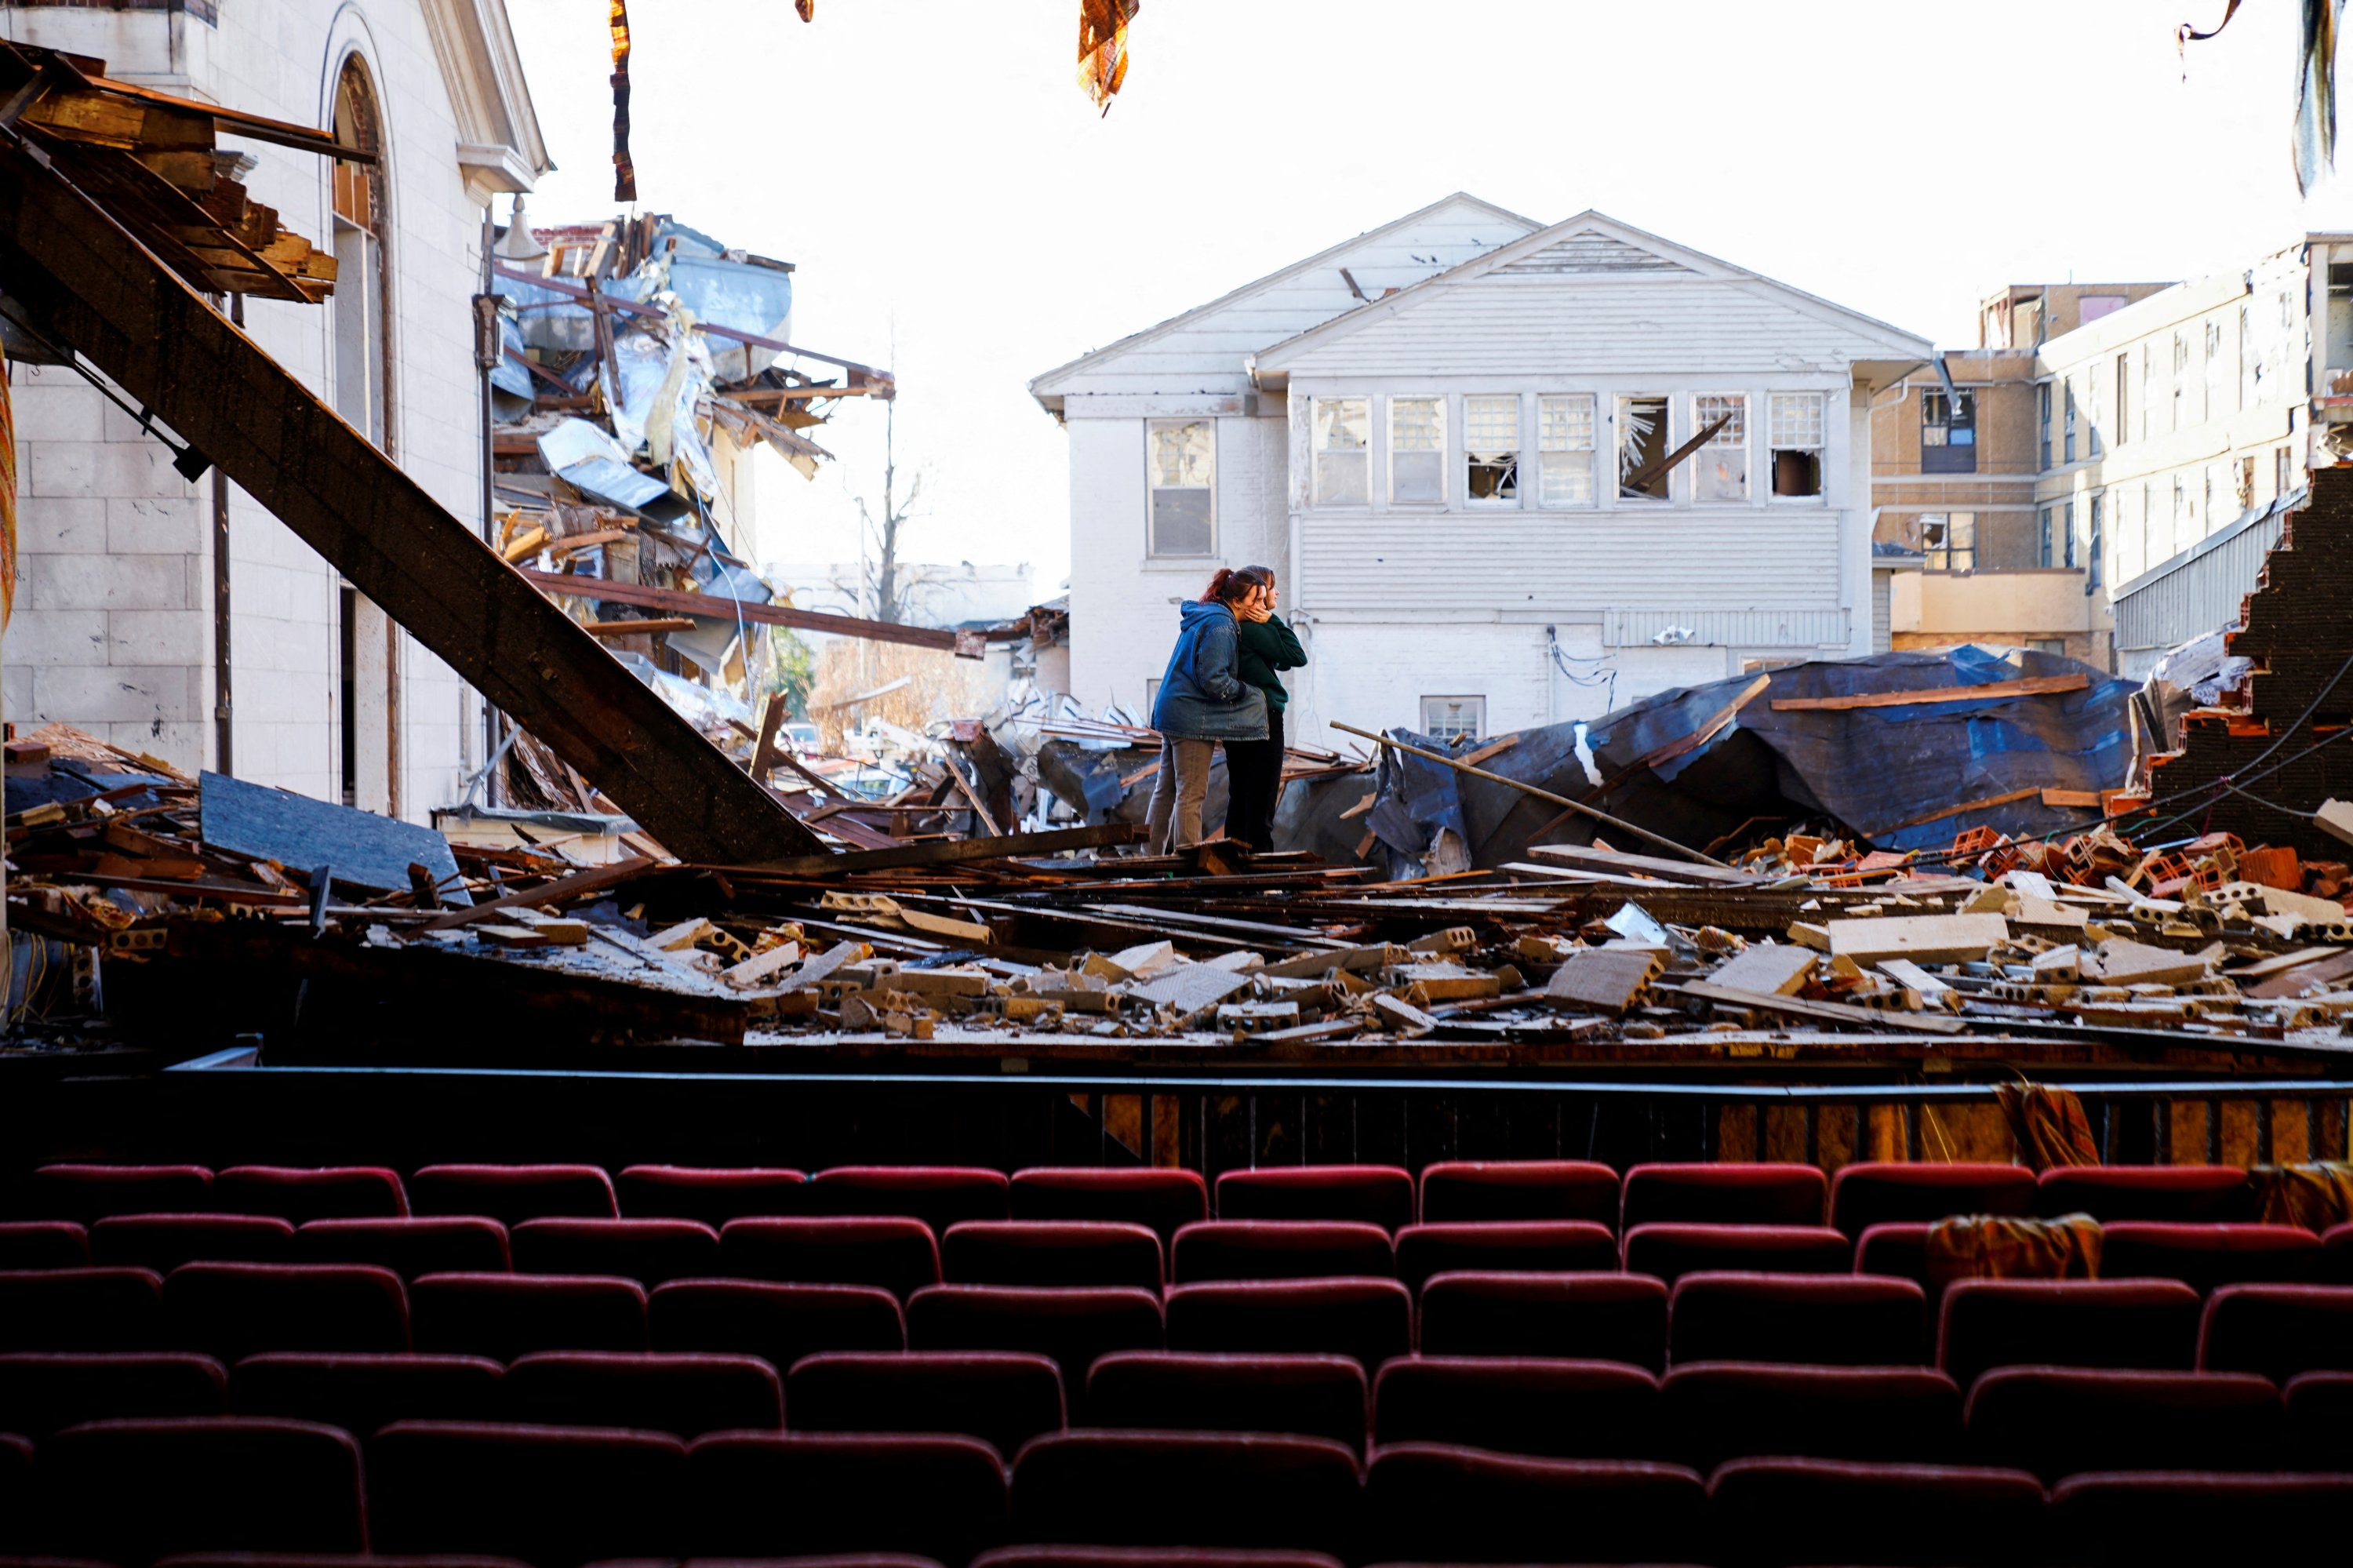 Sisters Julianna Sims, 21, and Natalie, 15 comfort each other while visiting the destroyed theater at the American Legion after a devastating outbreak of tornadoes ripped through several U.S. states in Mayfield, Kentucky, U.S., Dec. 19, 2021. (Reuters Photo)